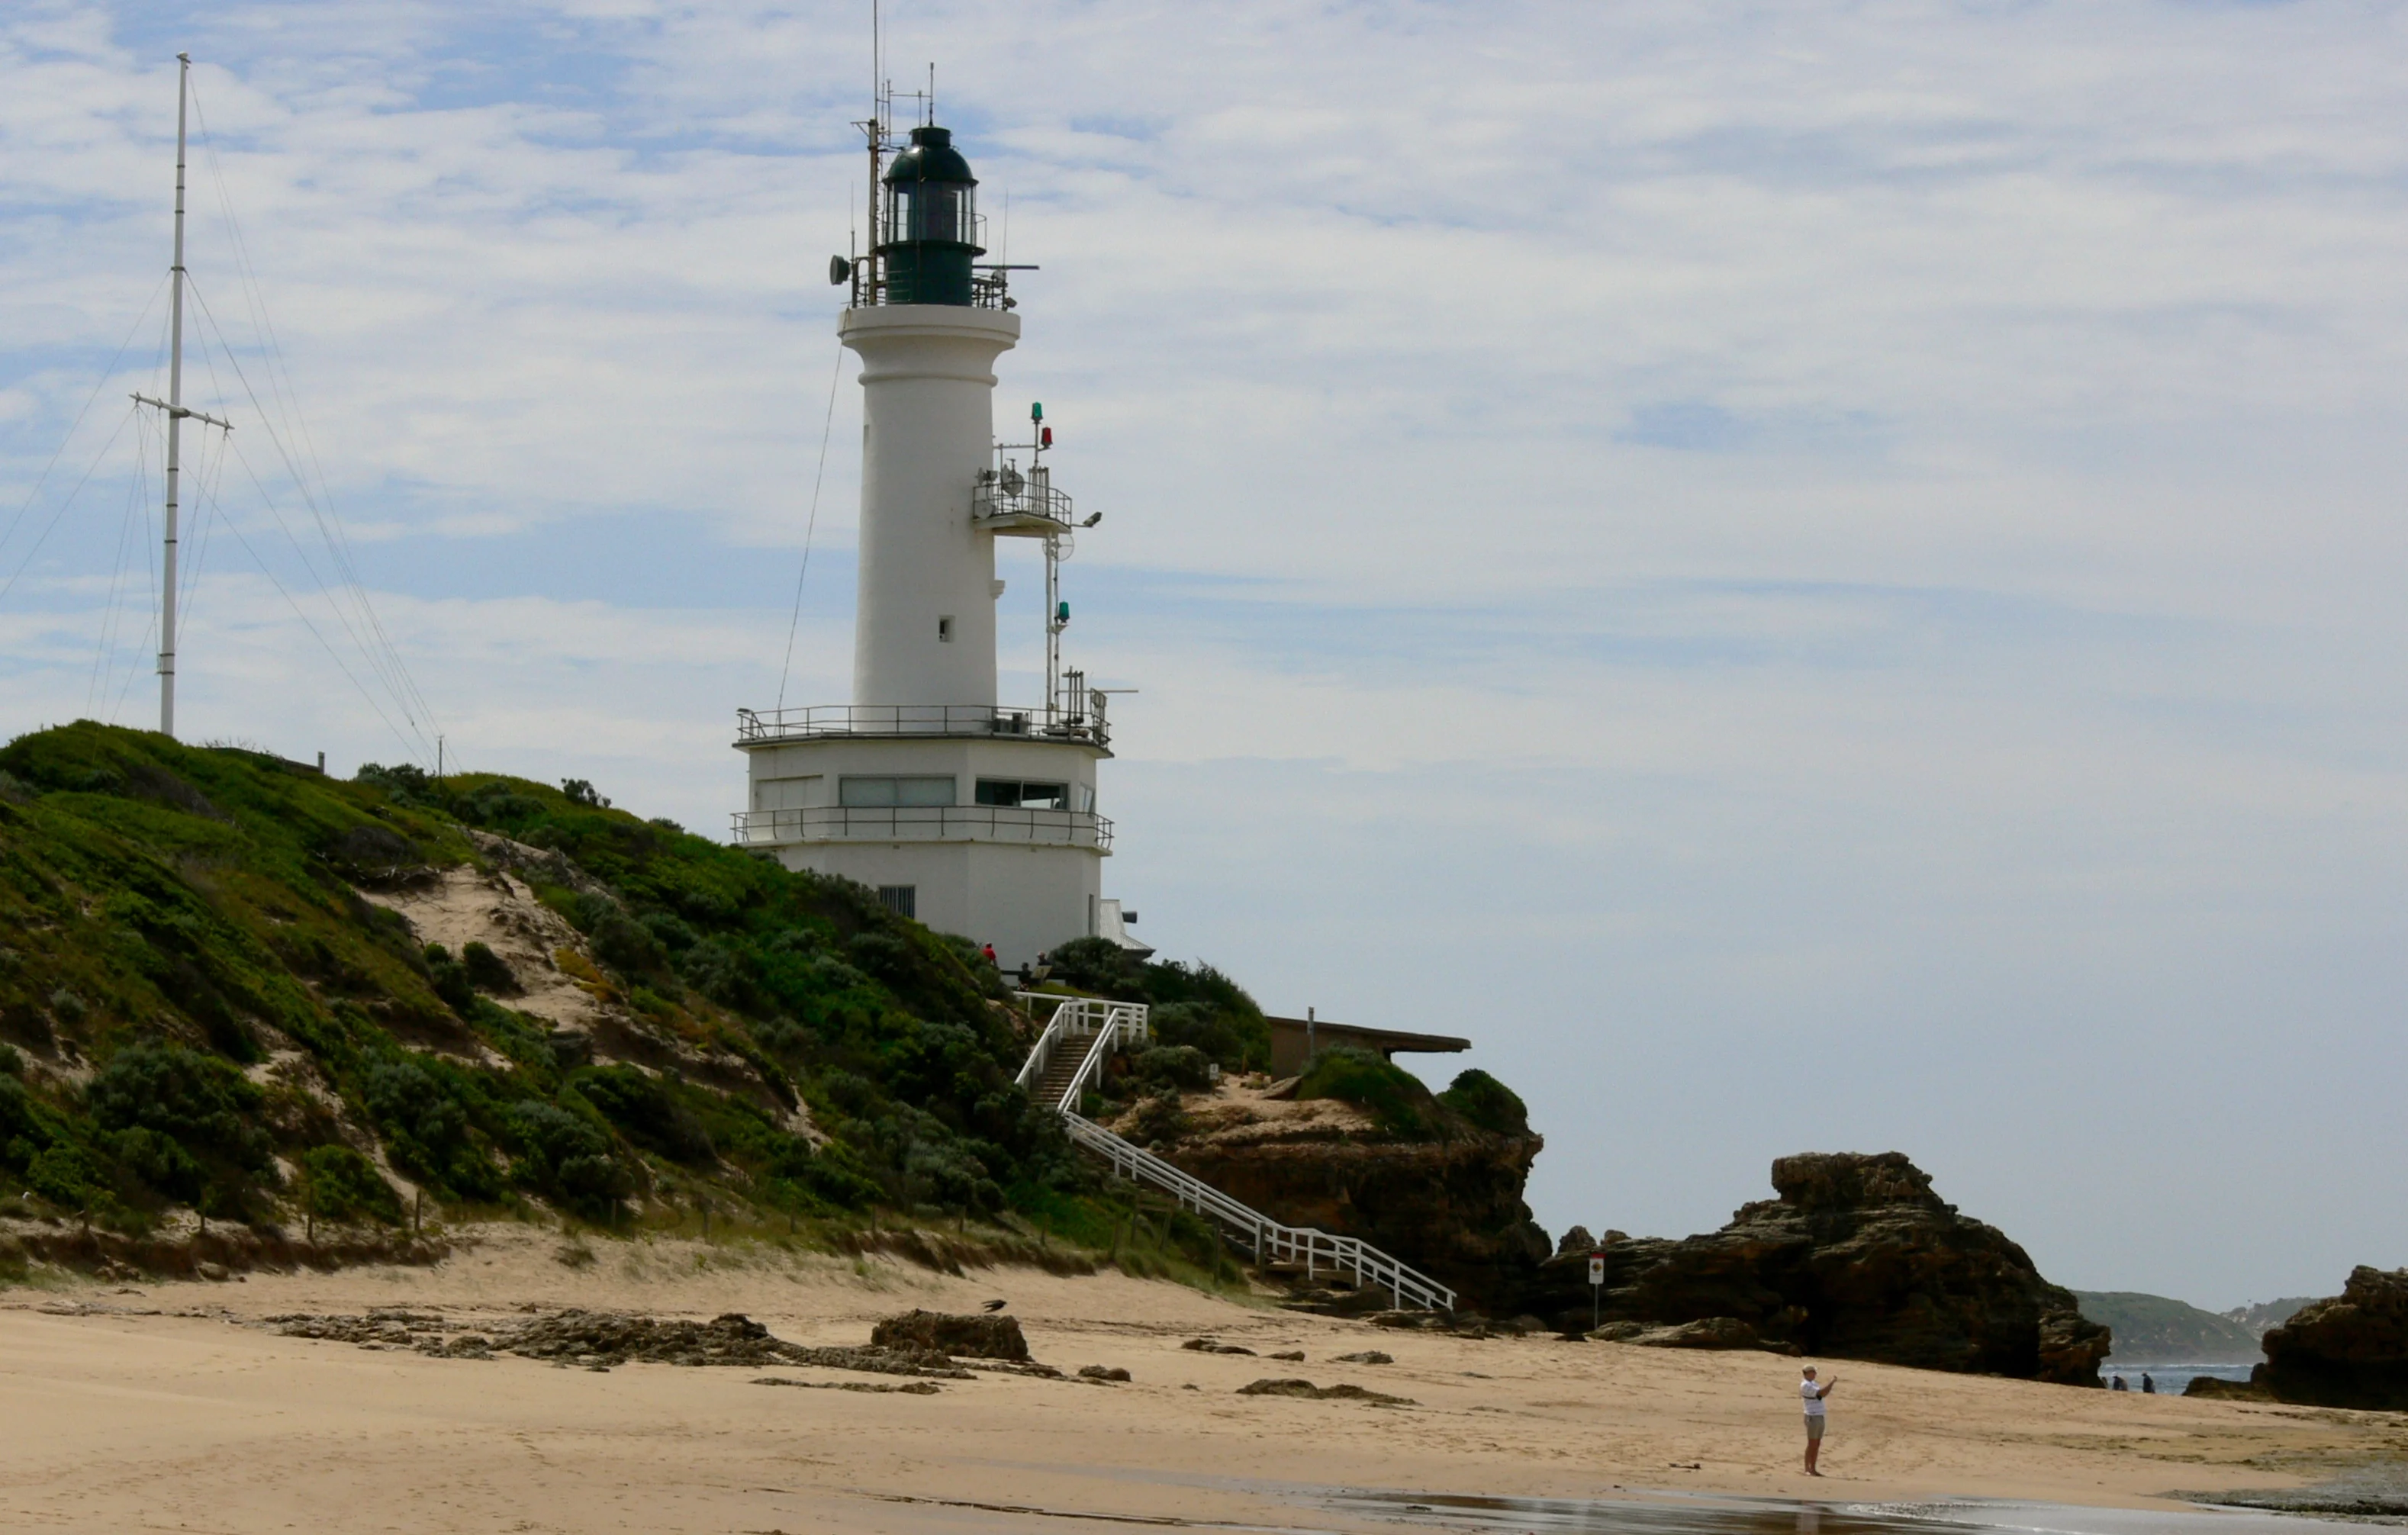 The Lighthouse at Point Lonsdale, Victoria.